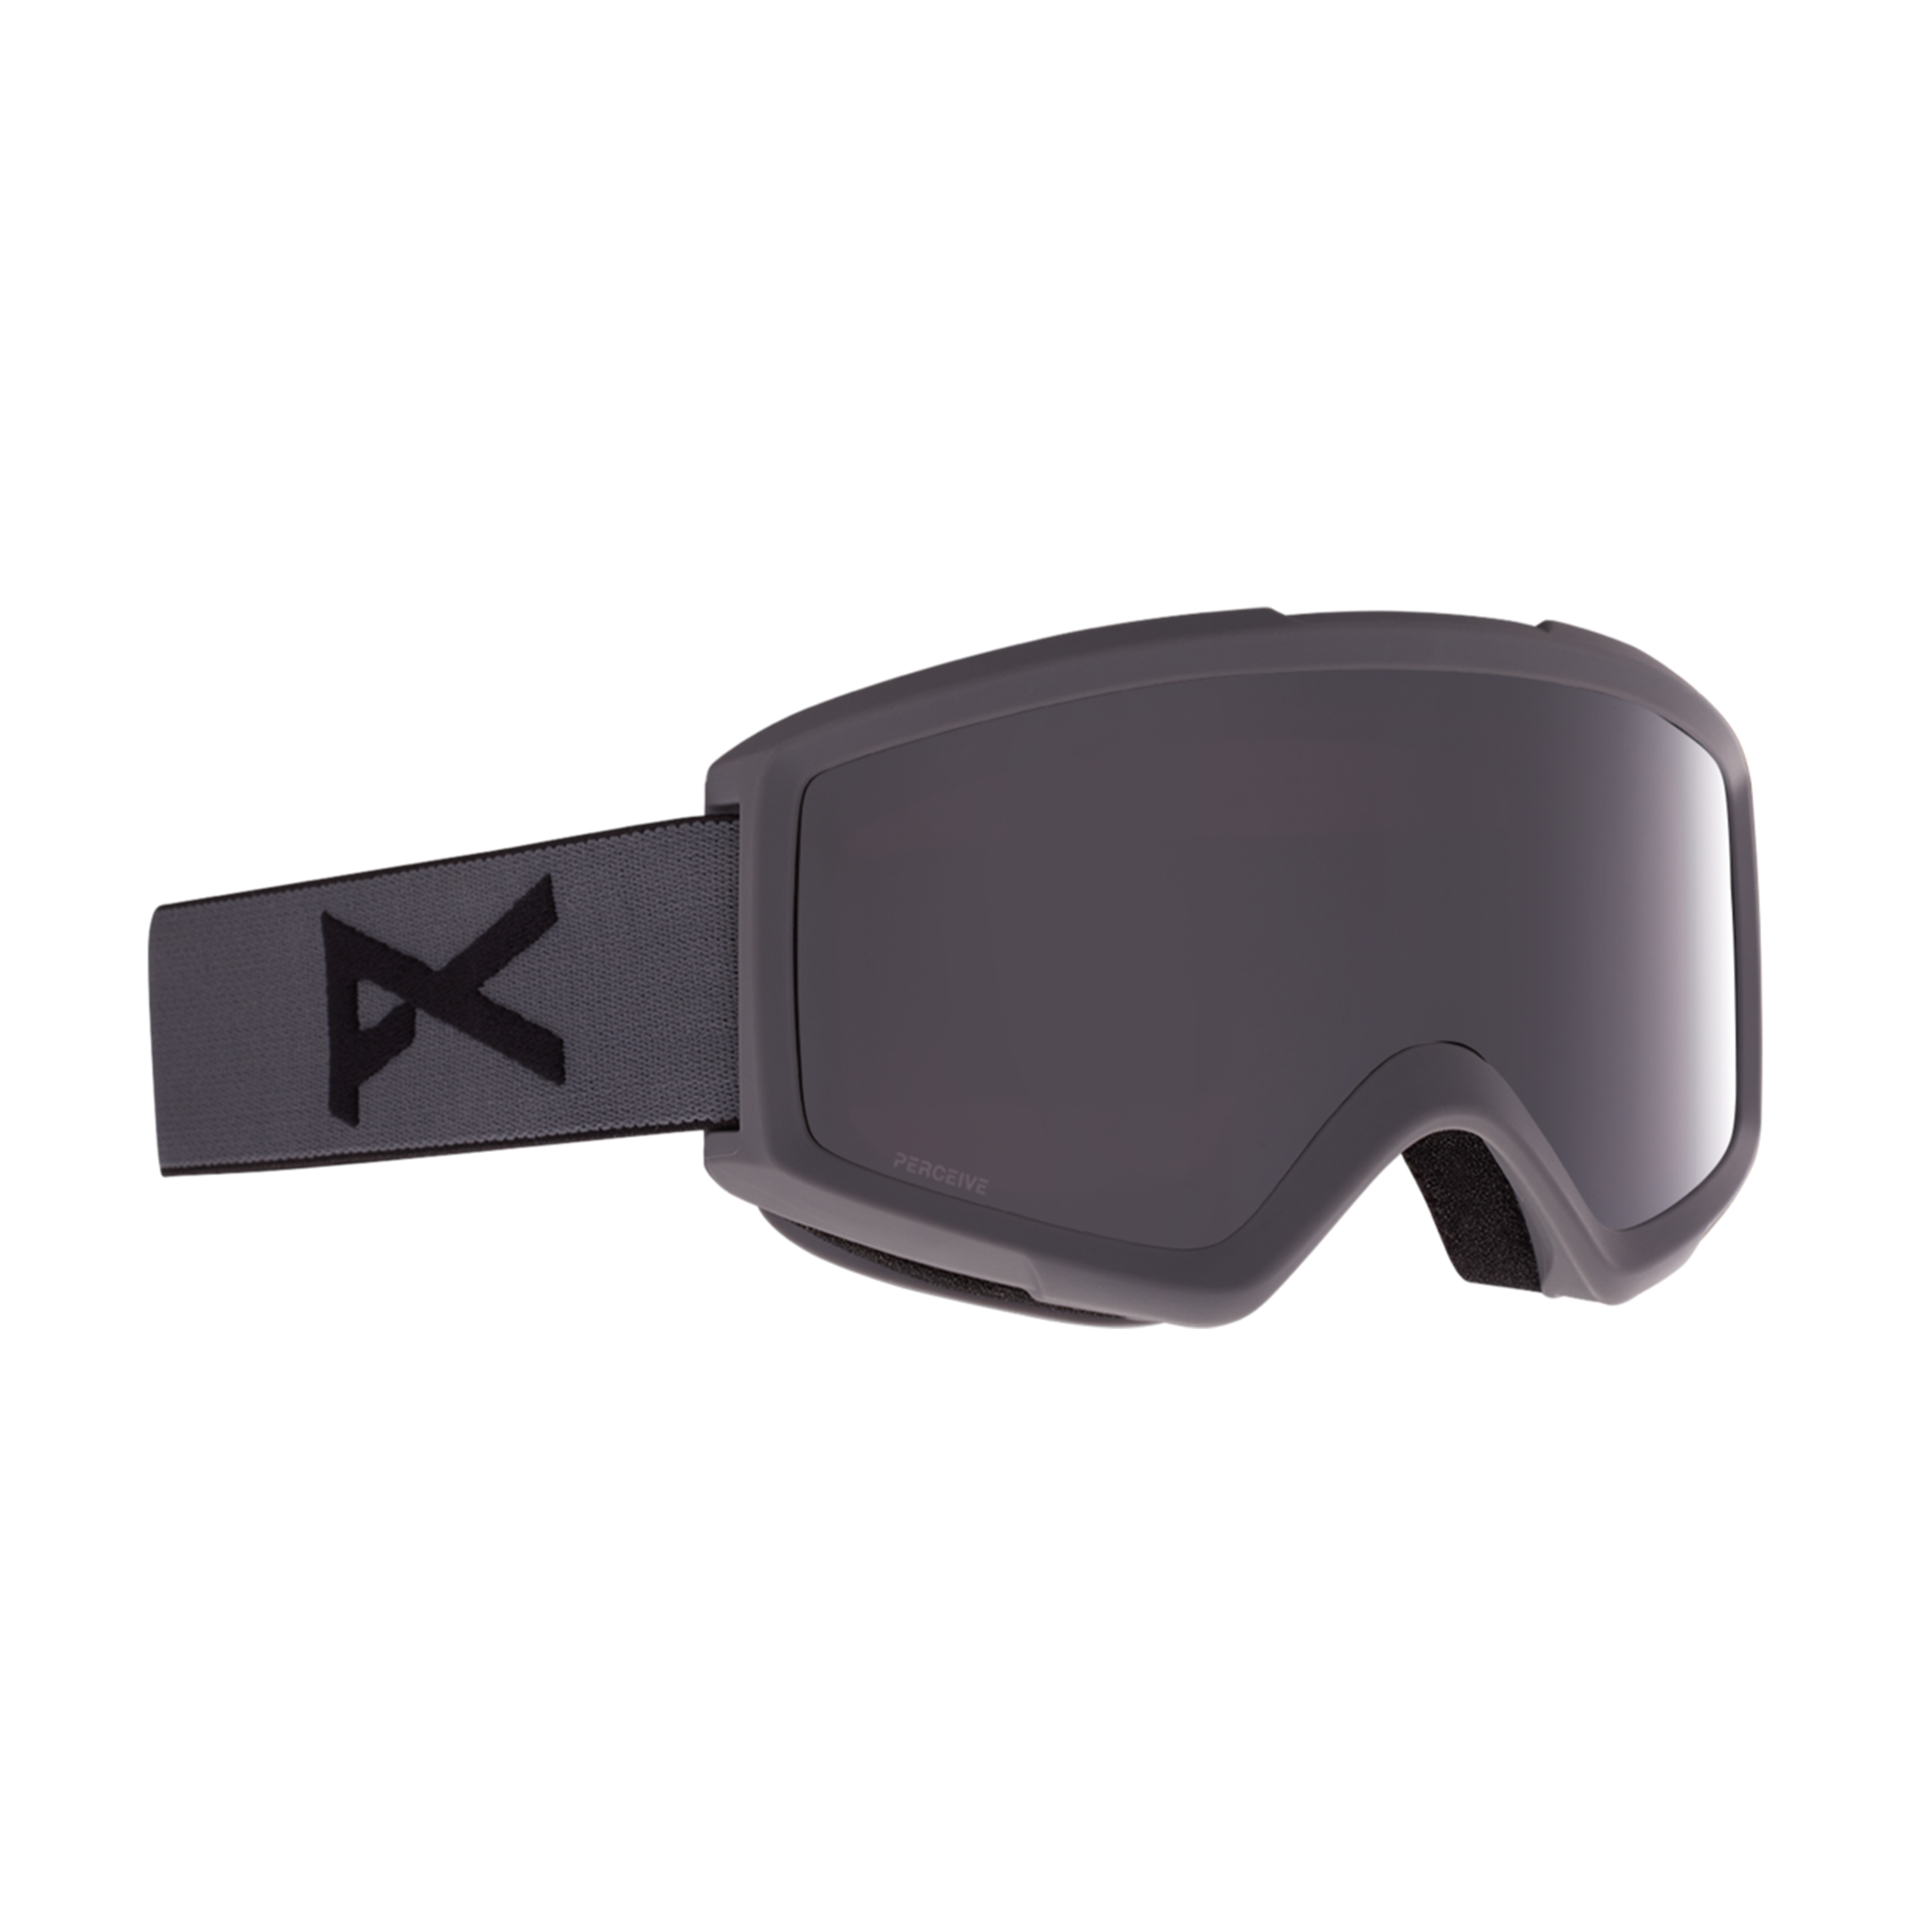 ANON HELIX 2.0 GOGGLES - STEALTH/PERCEIVE SUNNY ONYX (LOW BRIDGE)